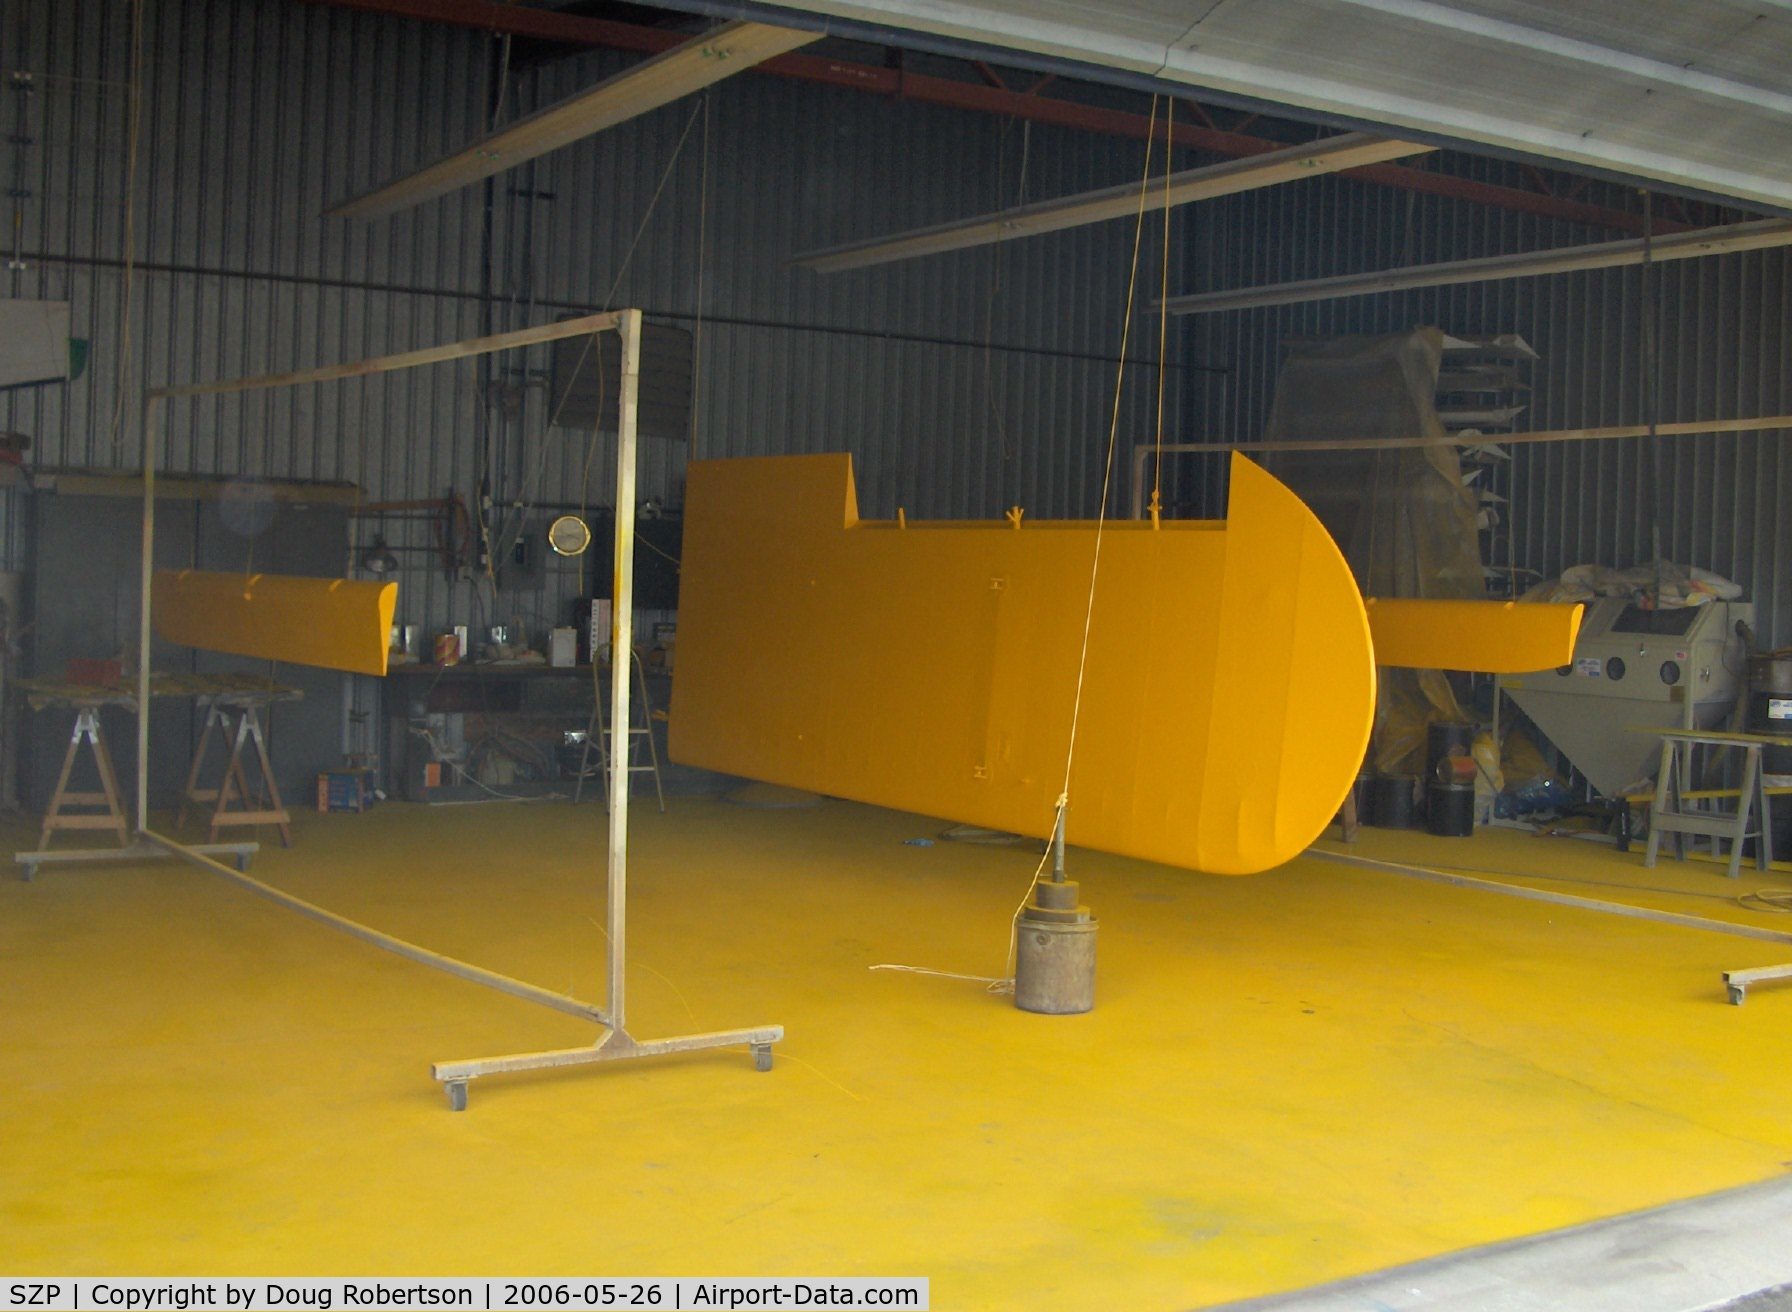 Santa Paula Airport (SZP) - Recover/Refinish Piper J3C CUB wing and ailerons, with a bit of overspray?